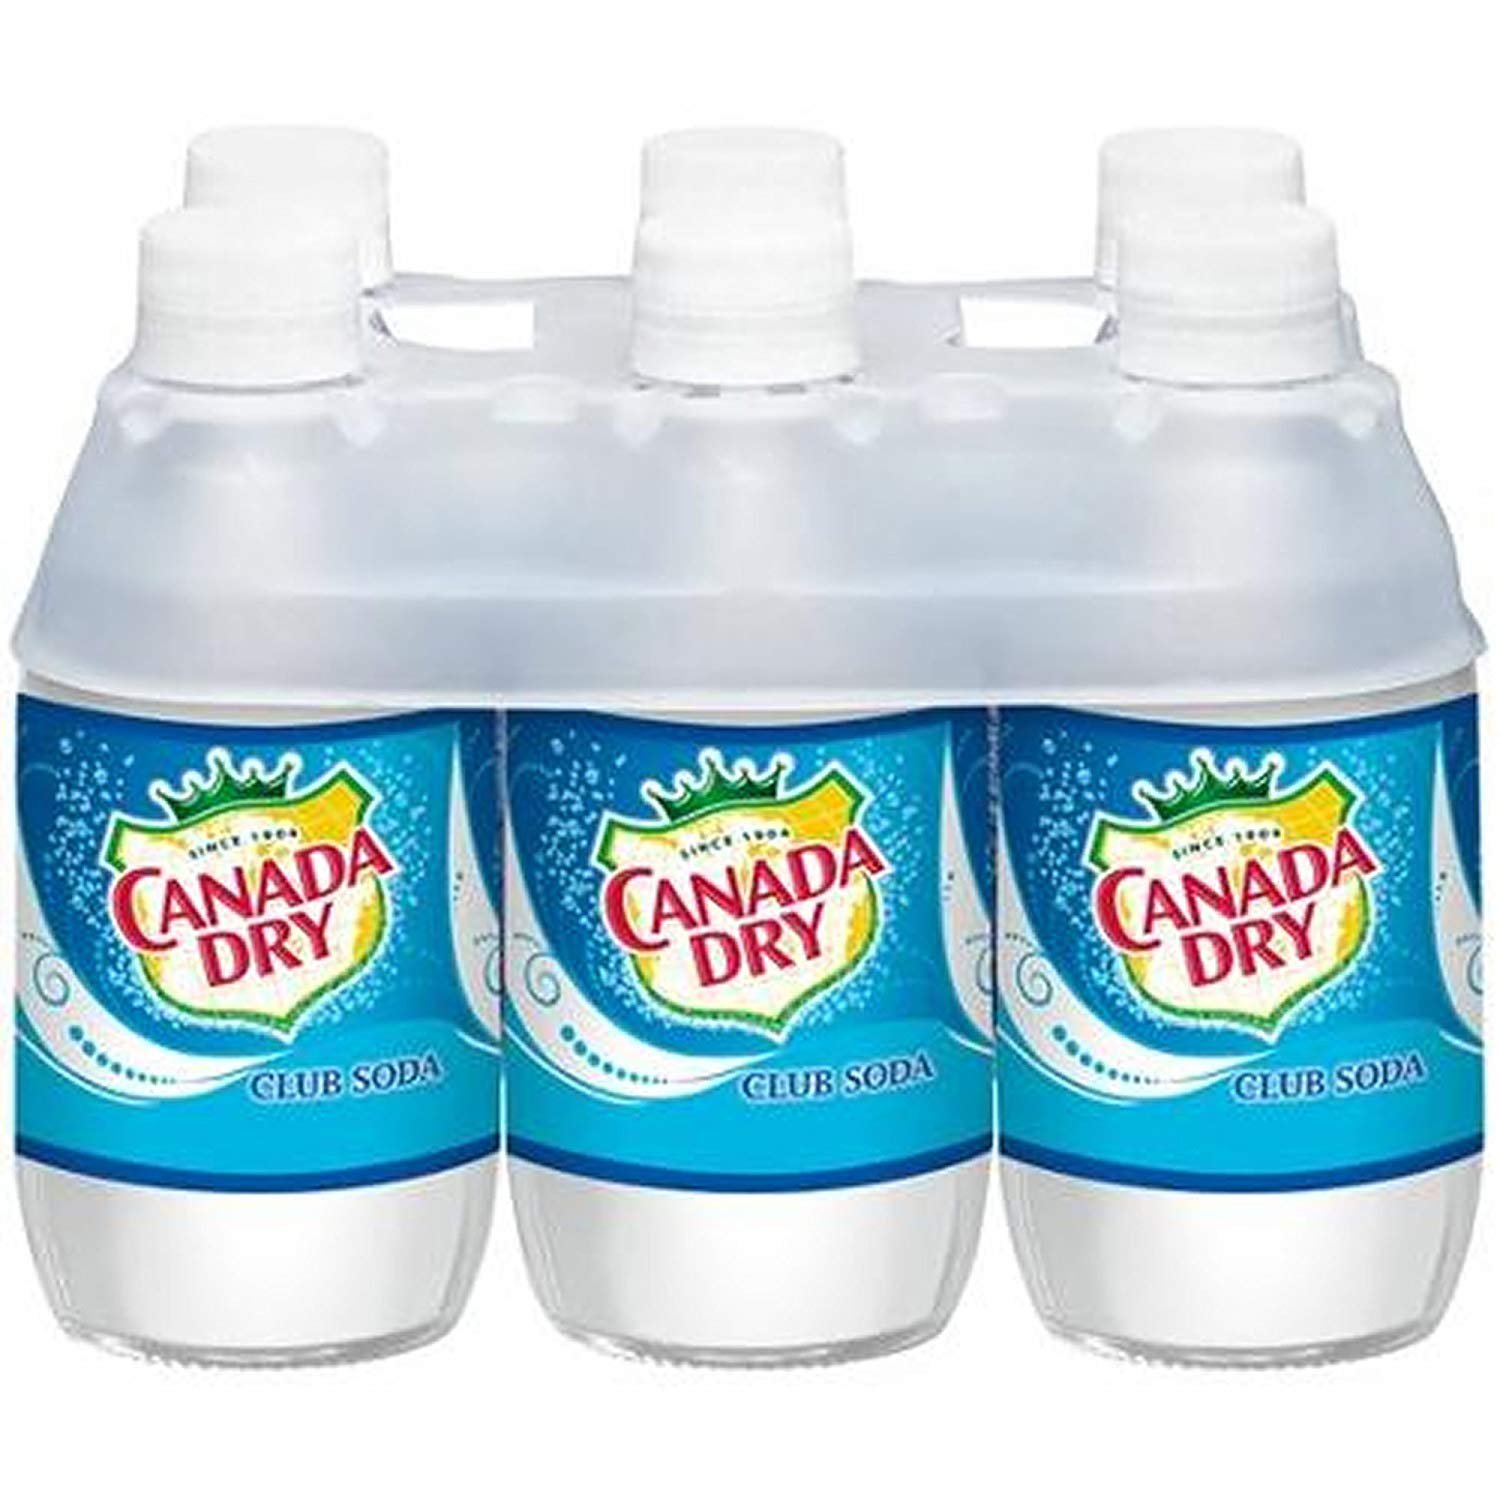 Canada Dry Club Soda Soft Drink, 10 Ounce (Pack of 24 Plastic Bottles), Deliciously Unique Flavor, Great Refreshing Taste Bottle - image 1 of 5